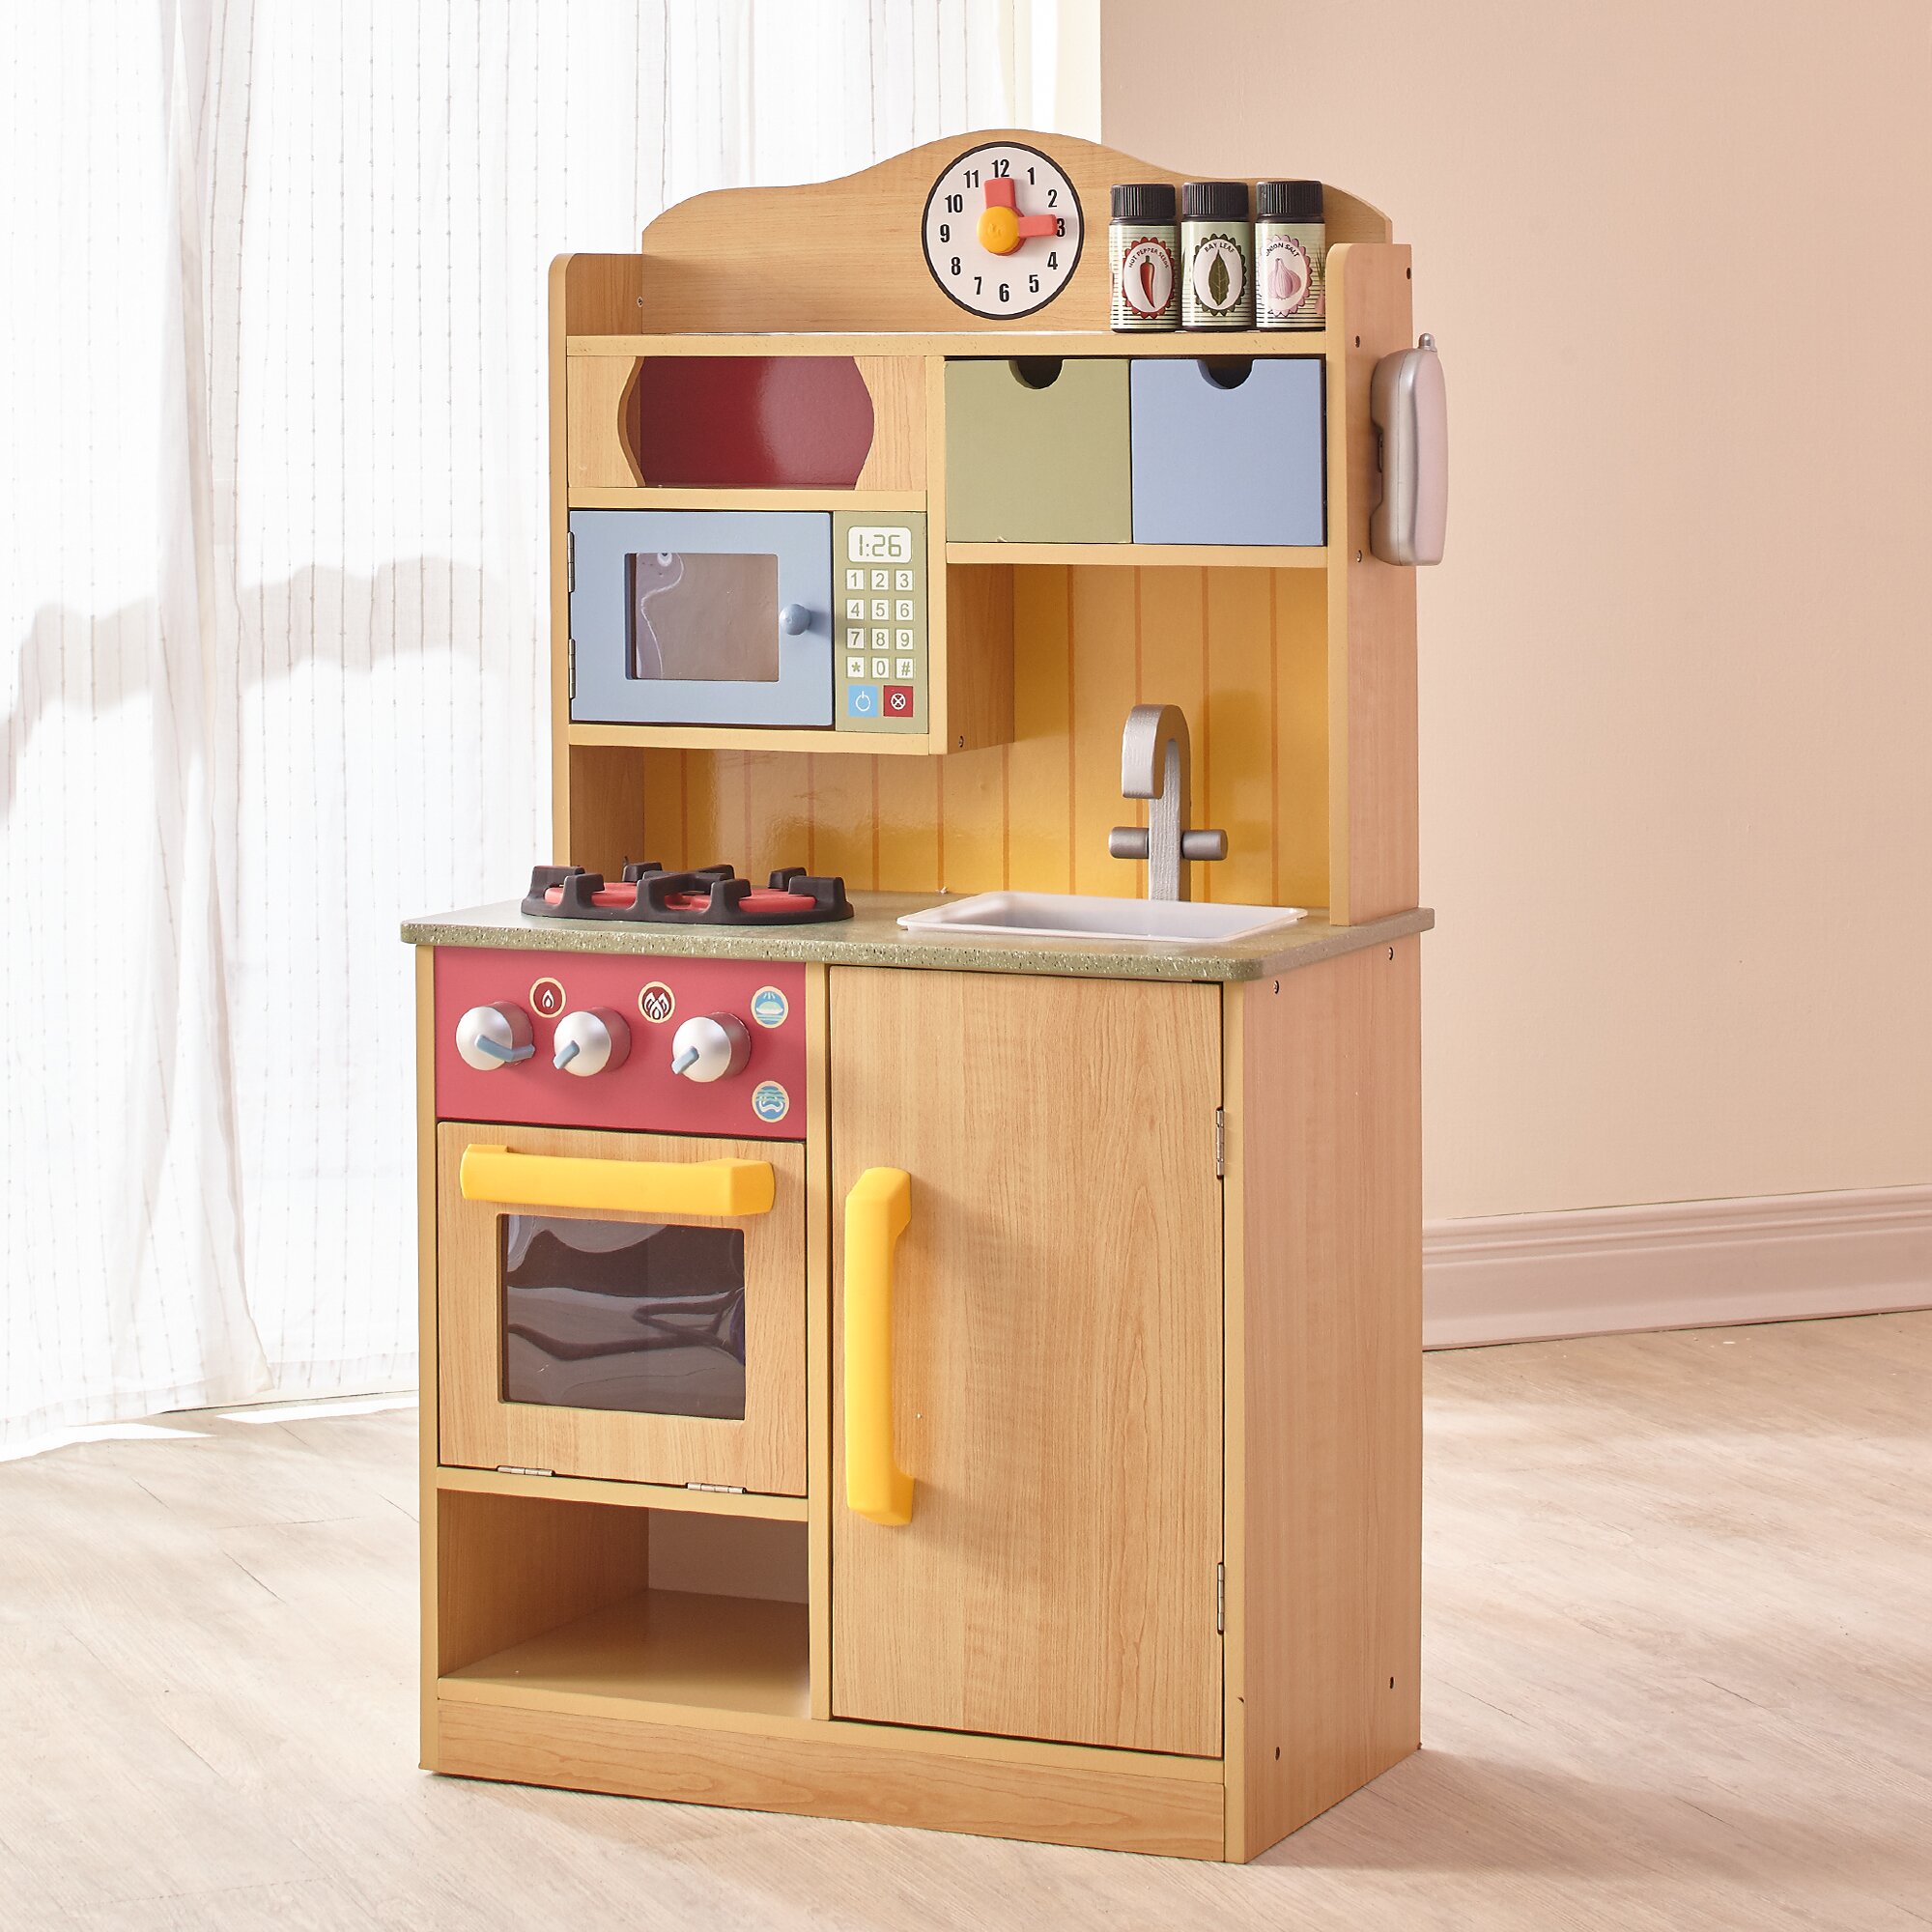 Teamson Kids Little Chef Wooden Play Kitchen with Accessories & Reviews